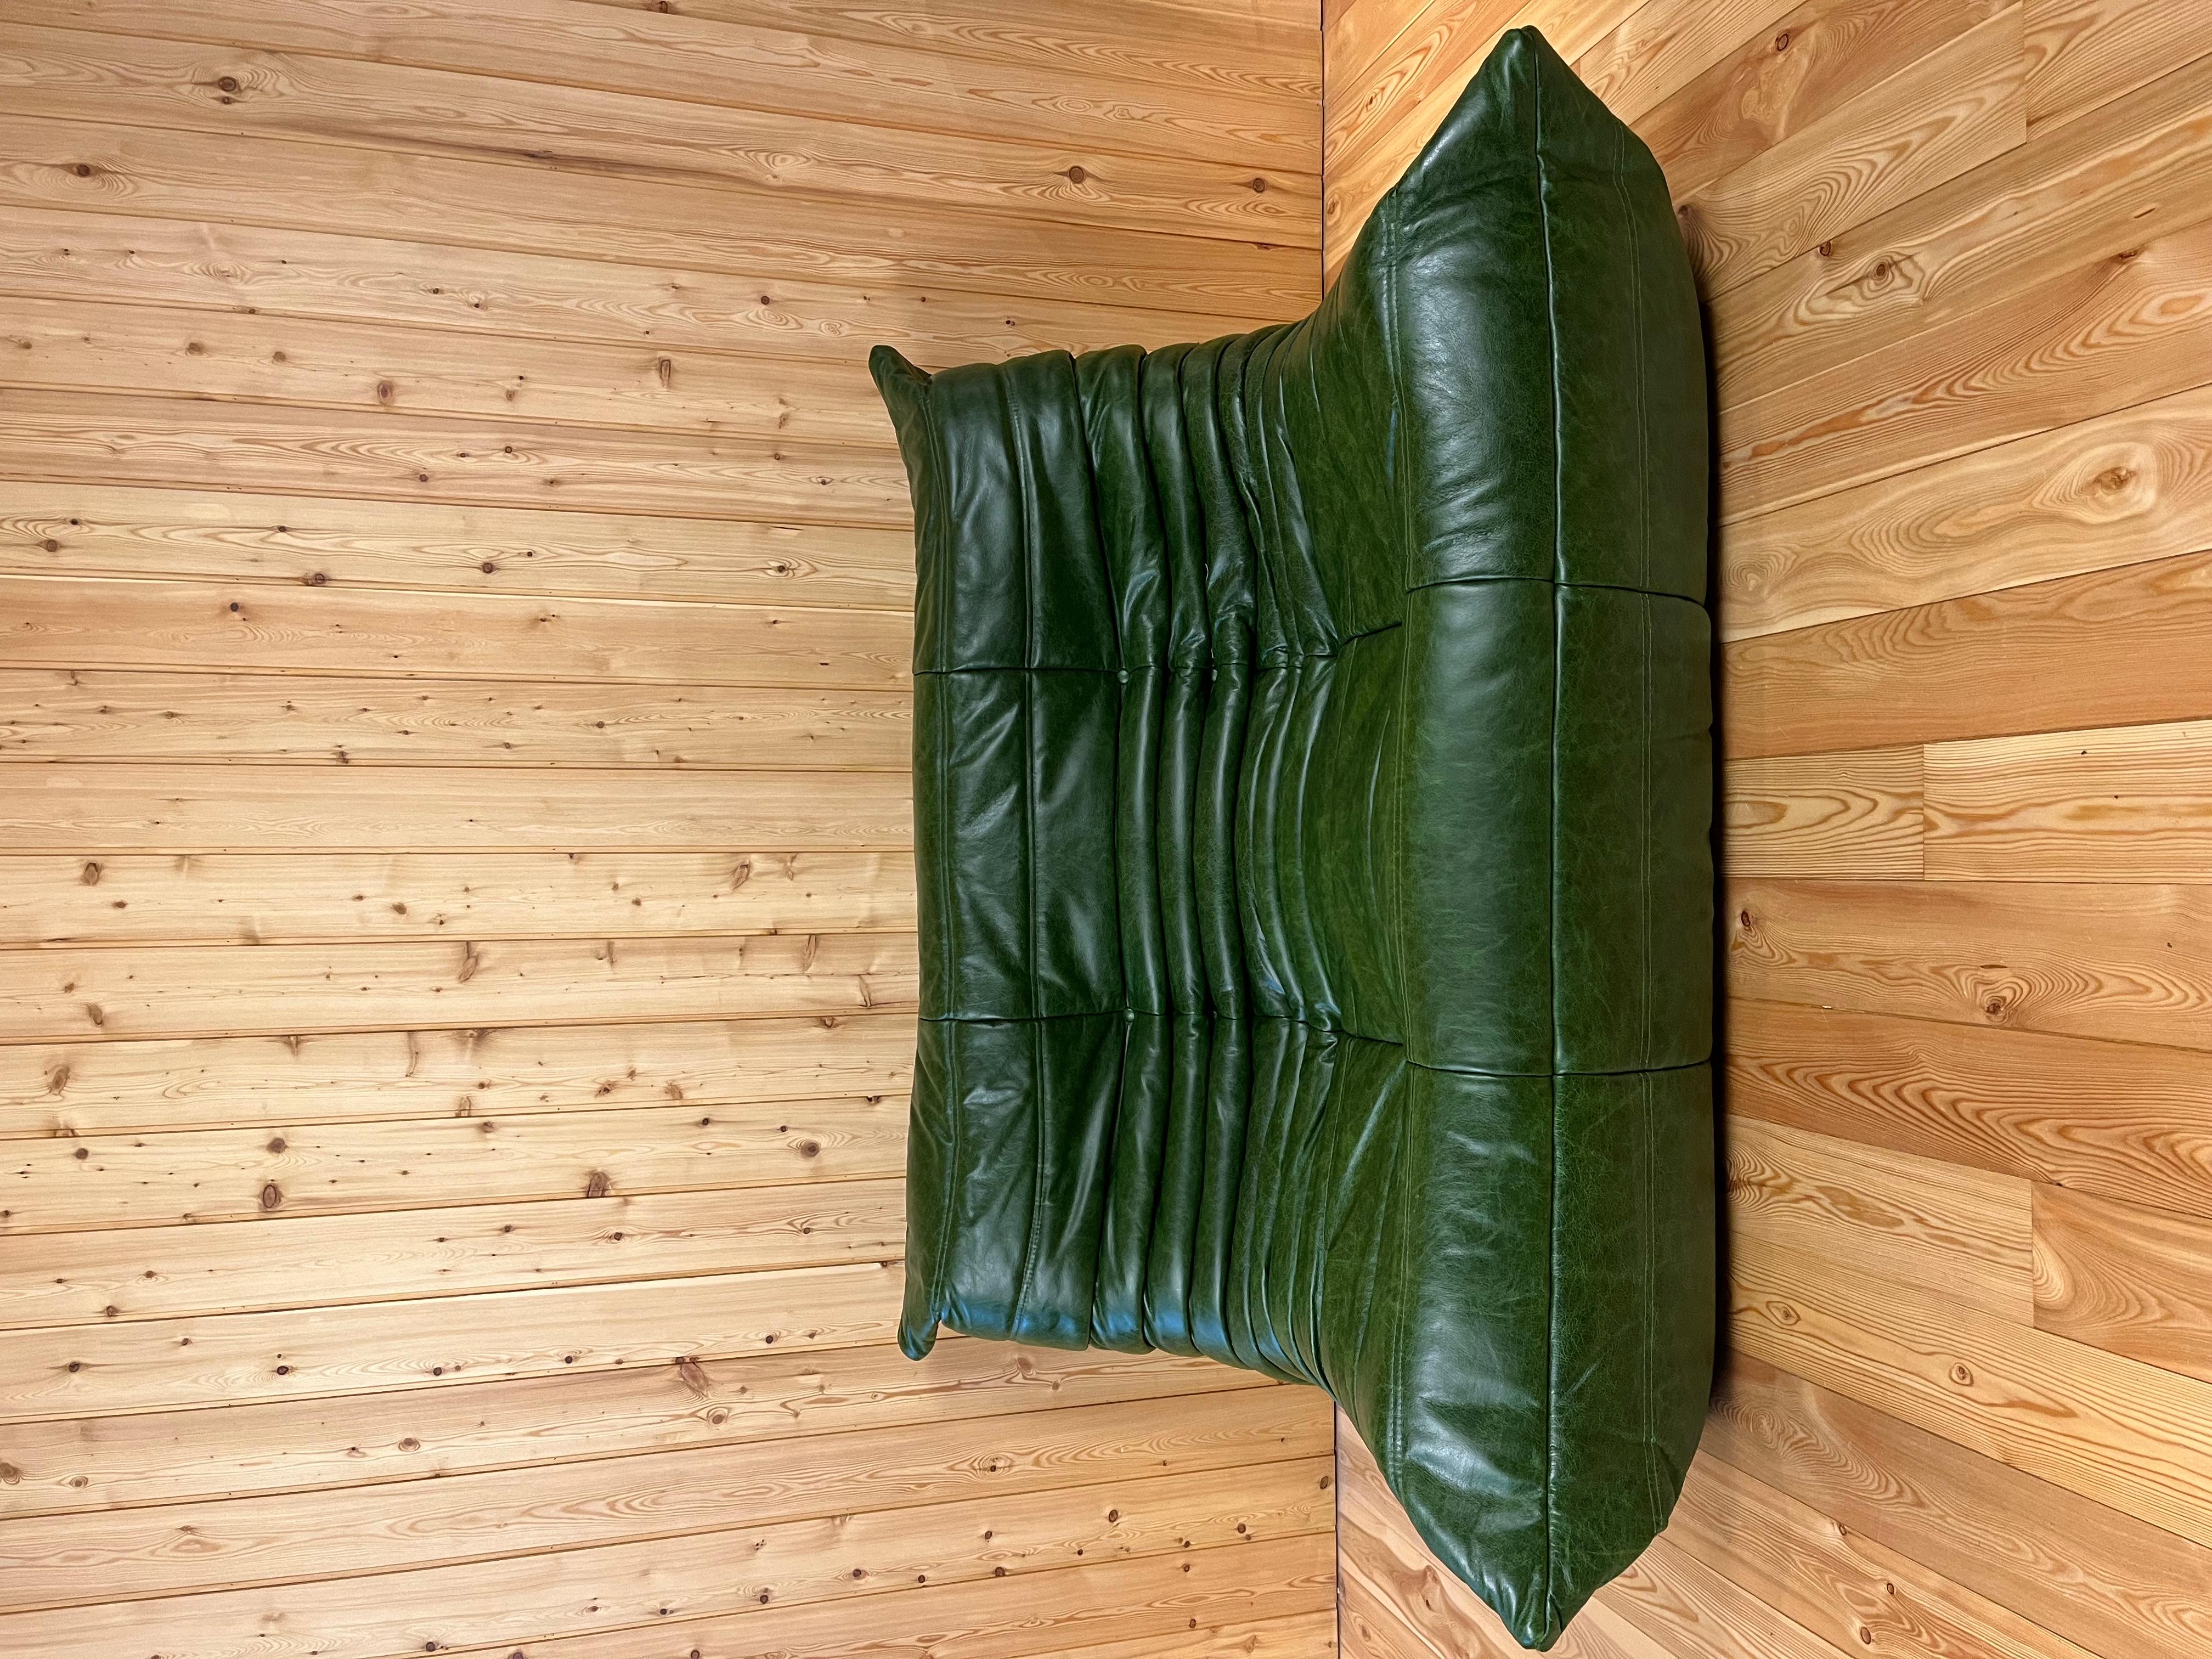 The Togo sofa was presented for the first time at Furnishing Expo in Paris in 1973, Designed by Michel Ducaroy who was inspired by a toothpaste tube. 
Produced by Ligne Roset.

This Togo sofa is a 2seater. 
it is upholstered with a green leather. 
